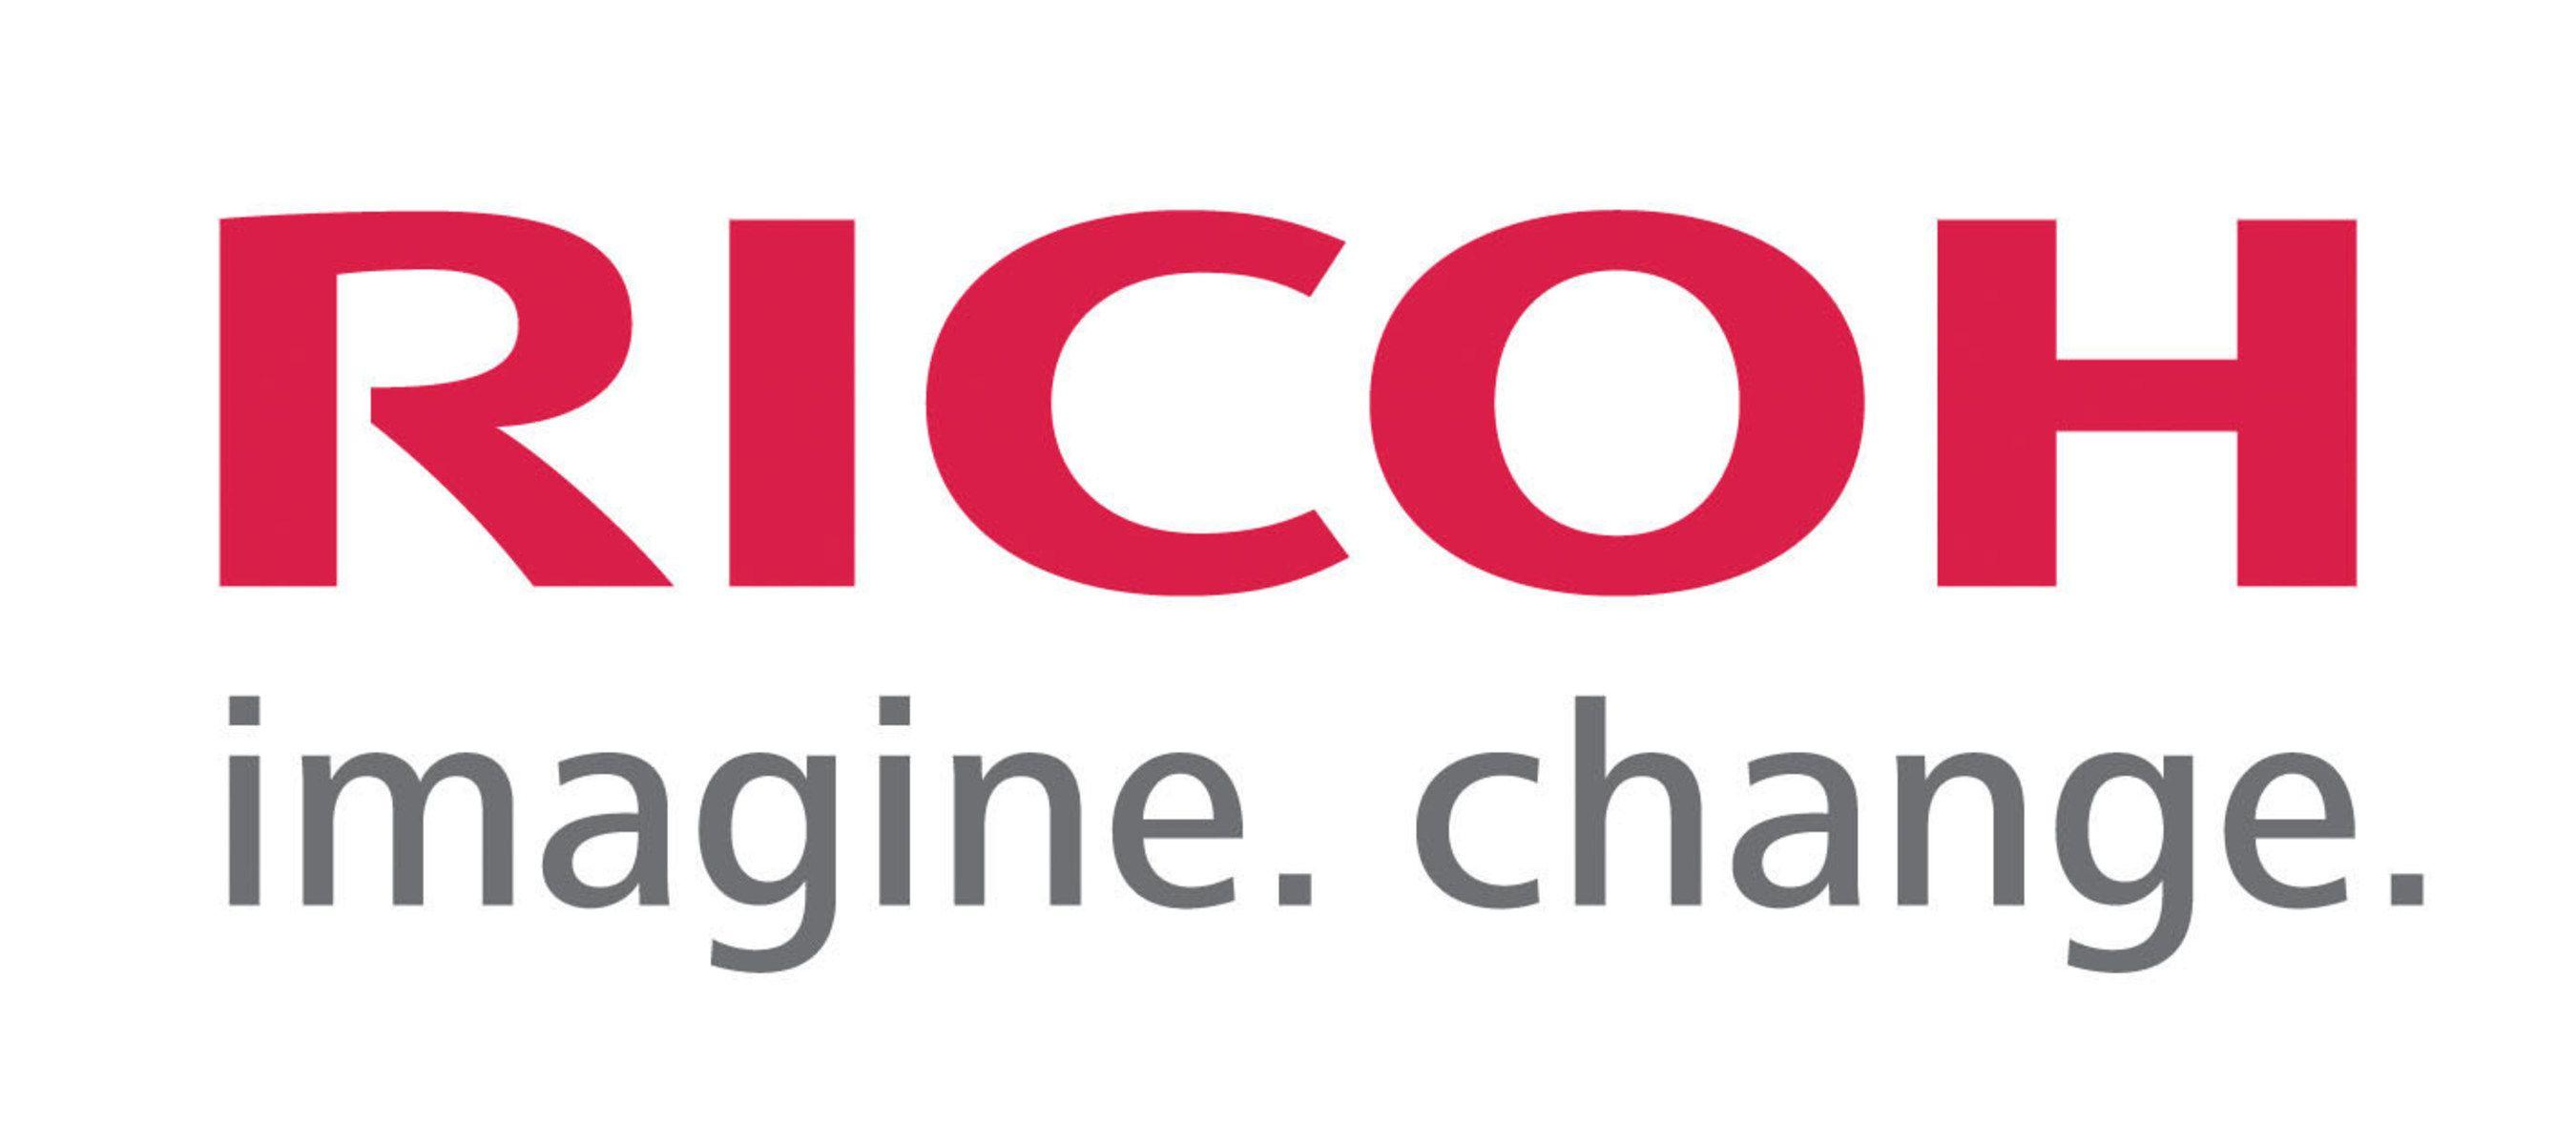 Ricoh Us Logo - Ricoh awards scholarships to students for development of sustainable ...